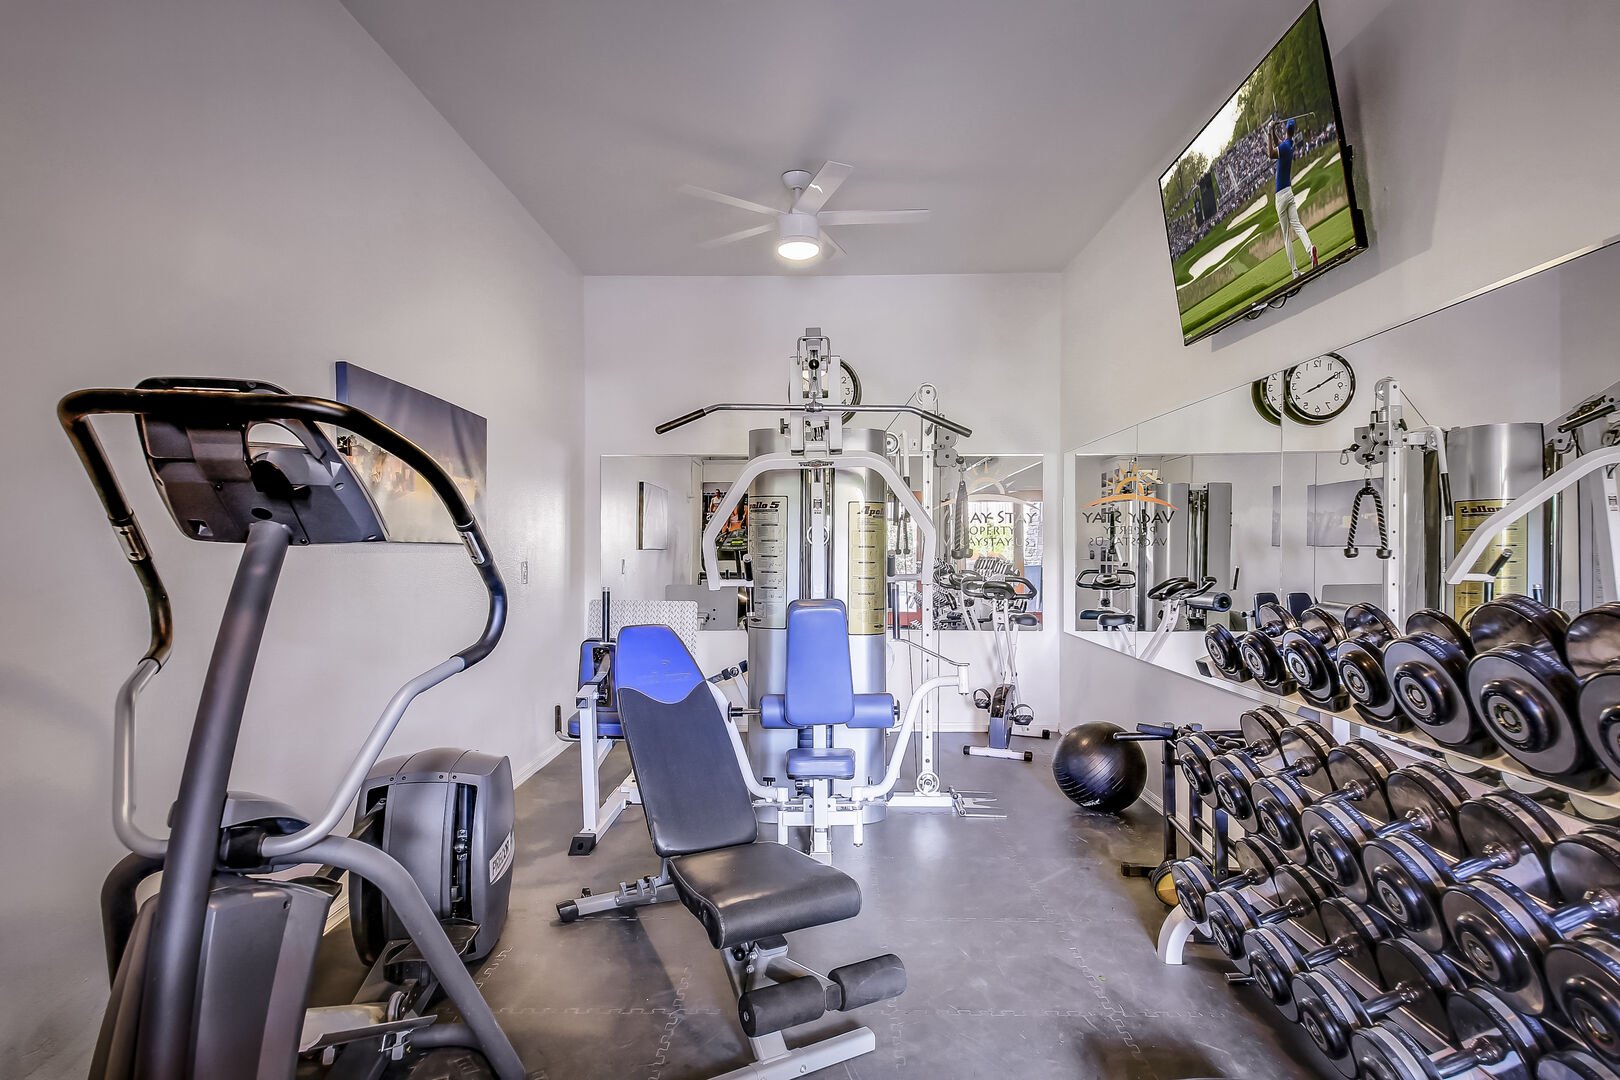 This private gym has everything you will need to enjoy a great workout, just bring your pre-workout shake!